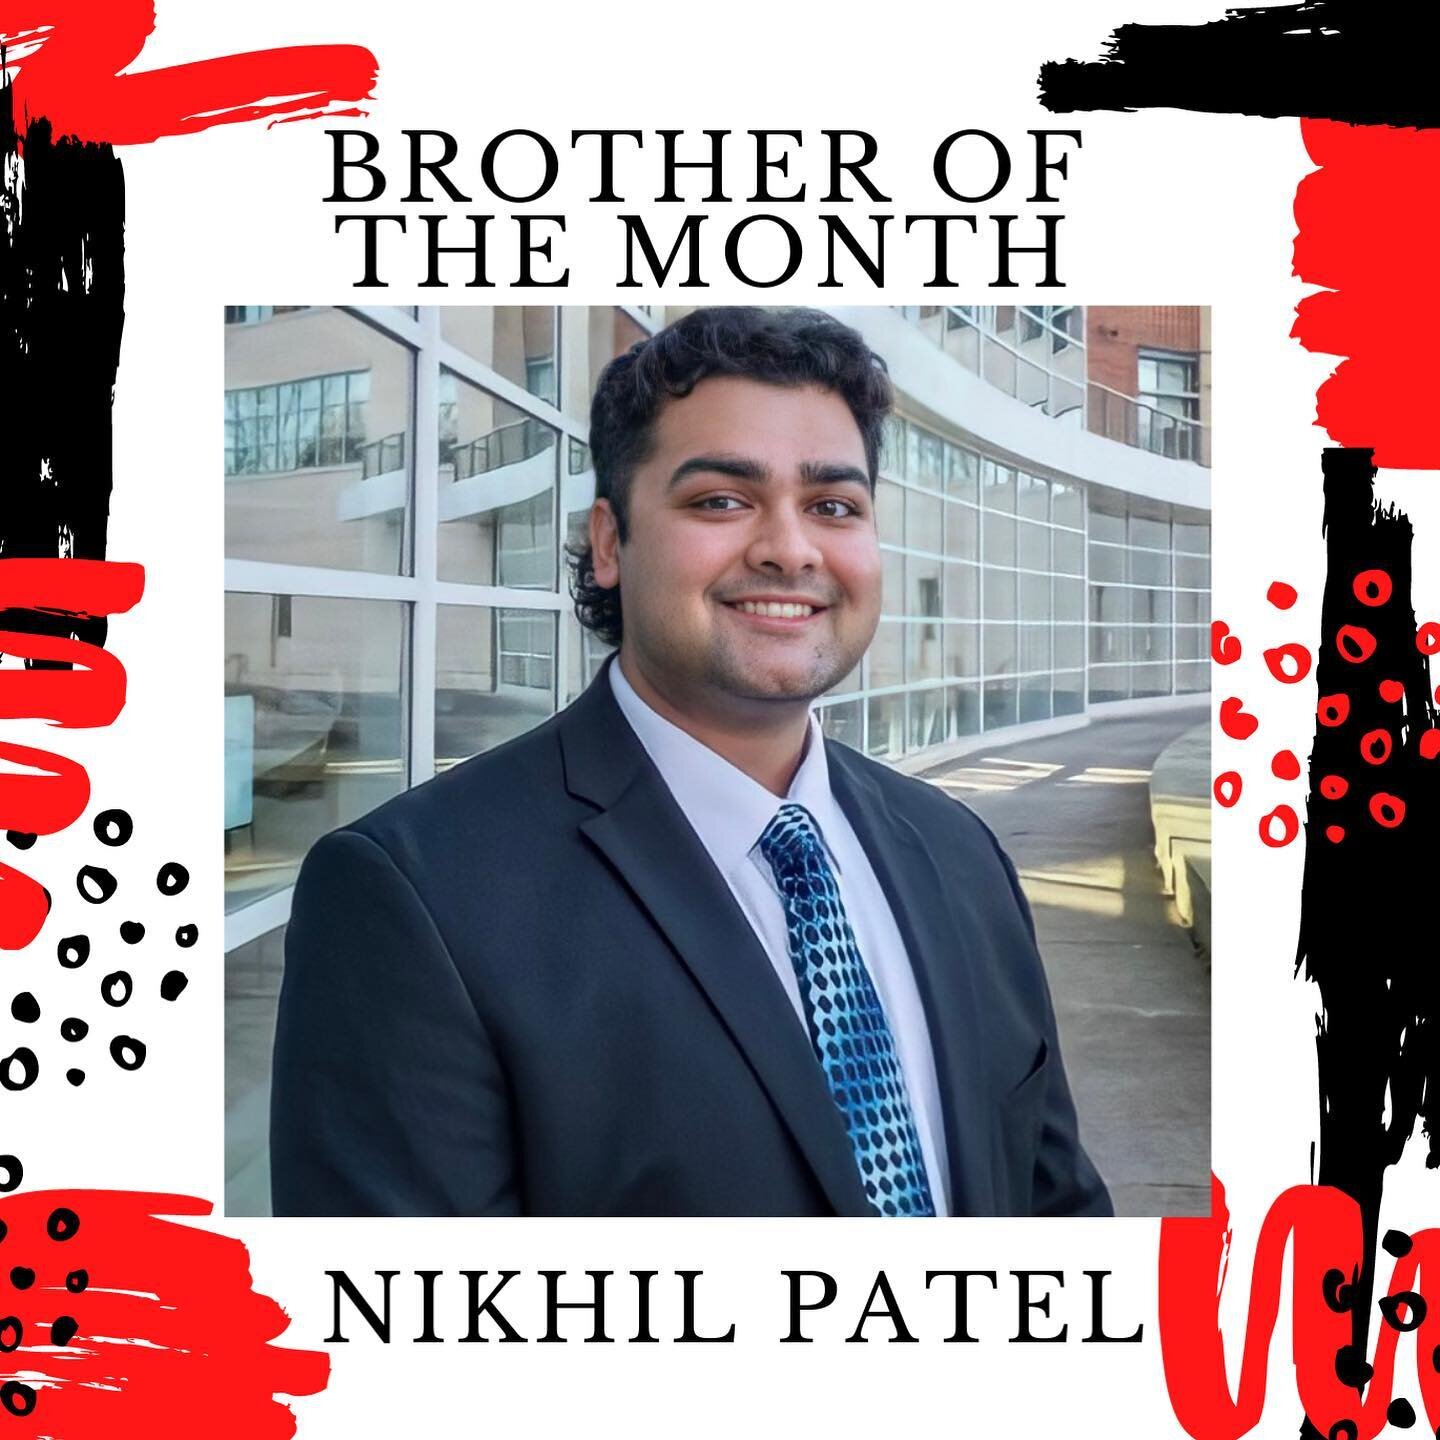 Our May Brother of the Month goes to @thenikhilpatel for being an extremely enthusiastic and encouraging brother. We are so lucky to have you join us for an additional semester!